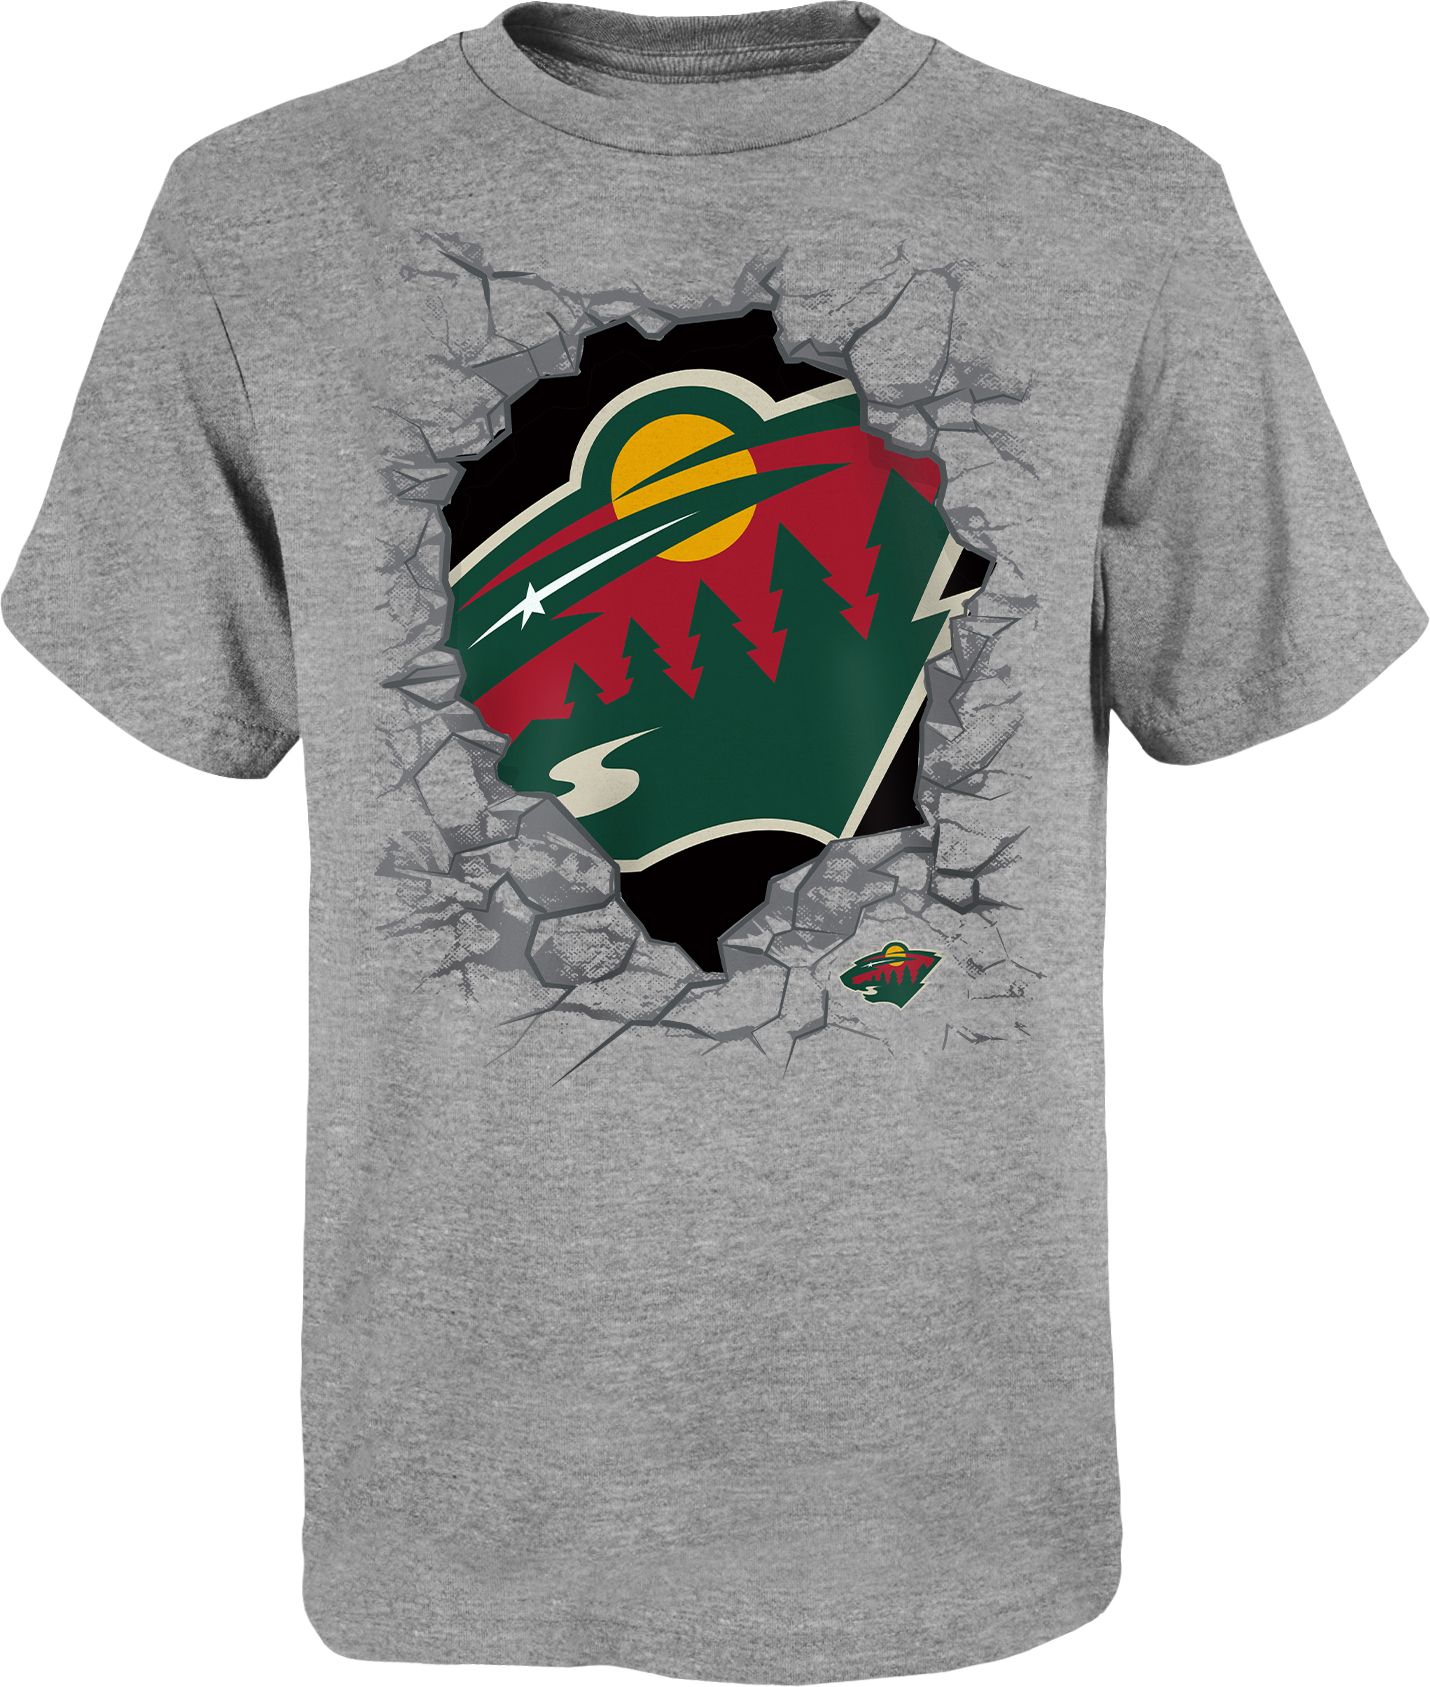 mn wild youth apparel